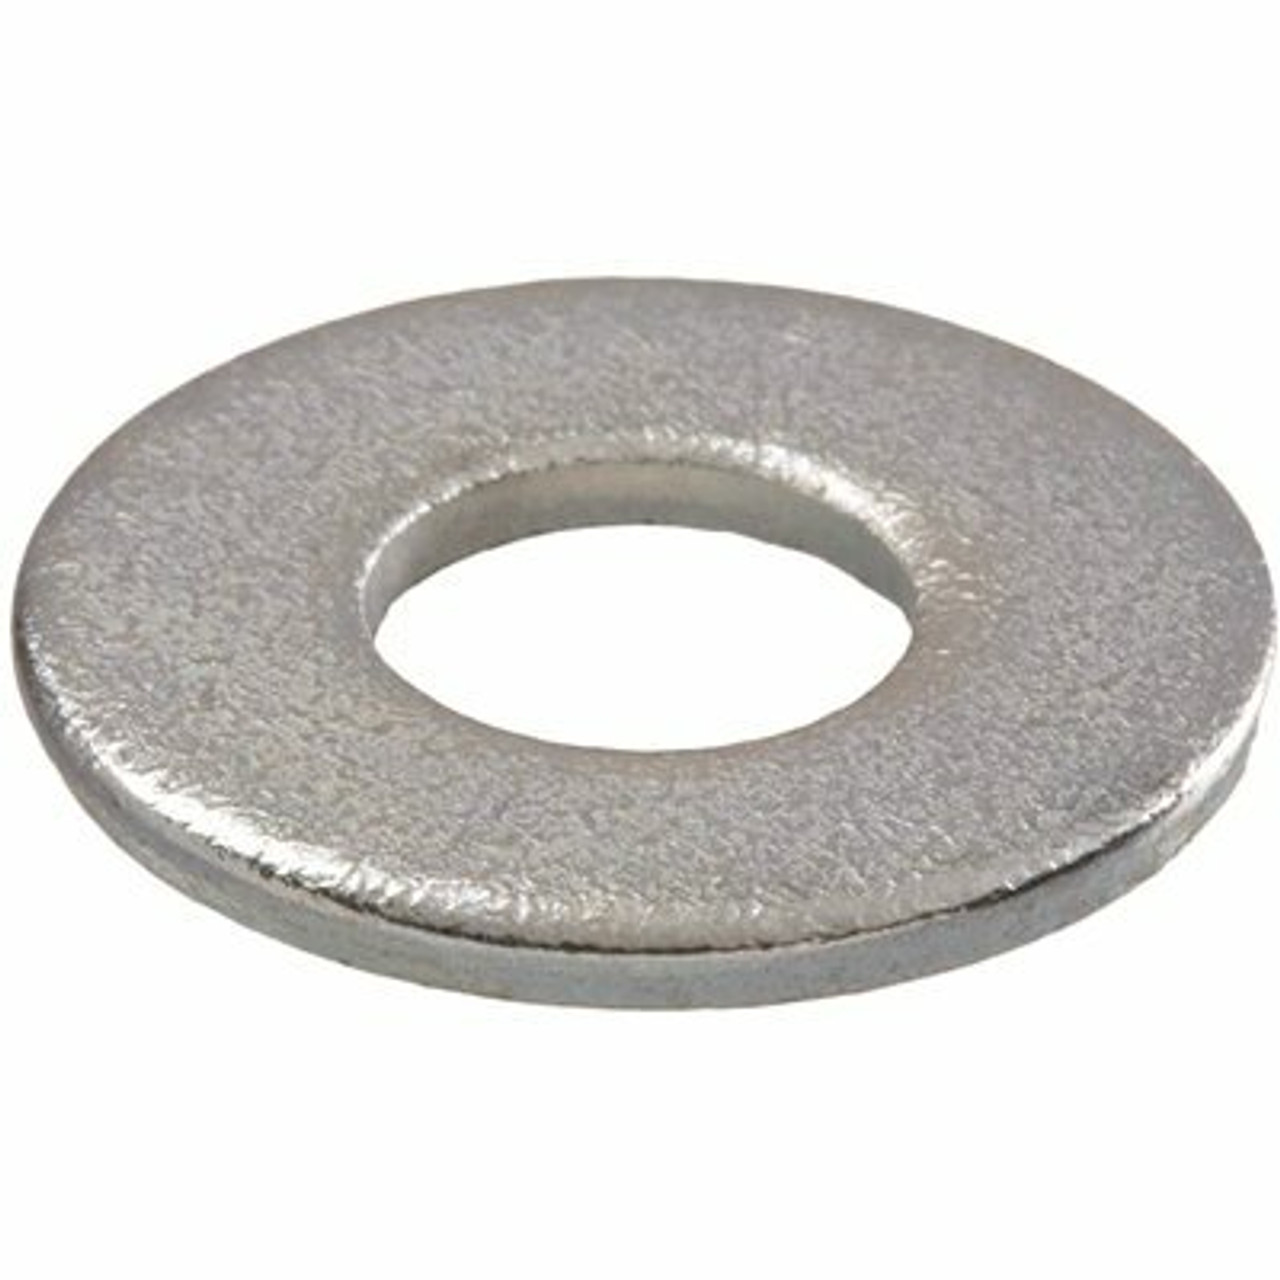 1/4 In. Uss Grade 2 Zinc Plated Flat Washers (500 Per Pack)